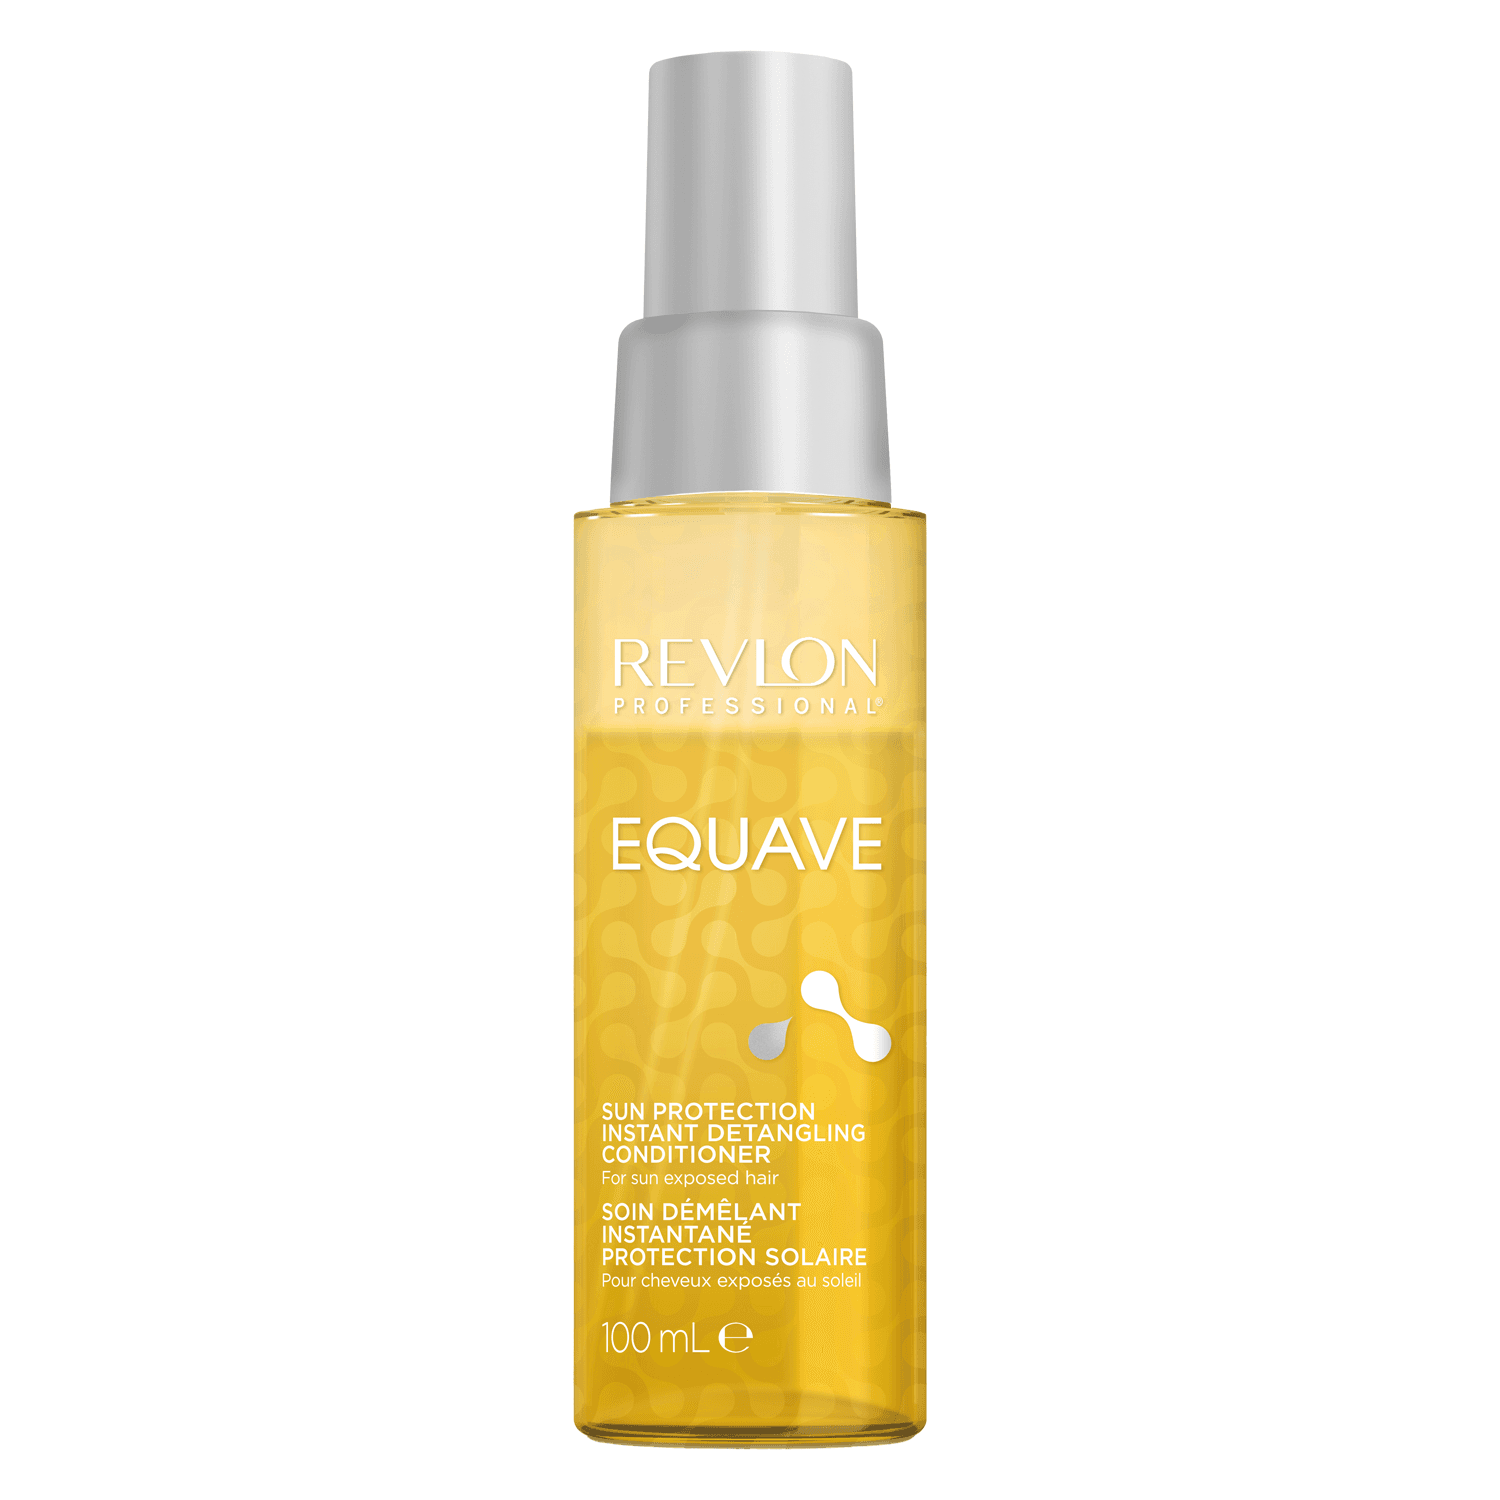 Equave - Sun Protection Leave-In Conditioner